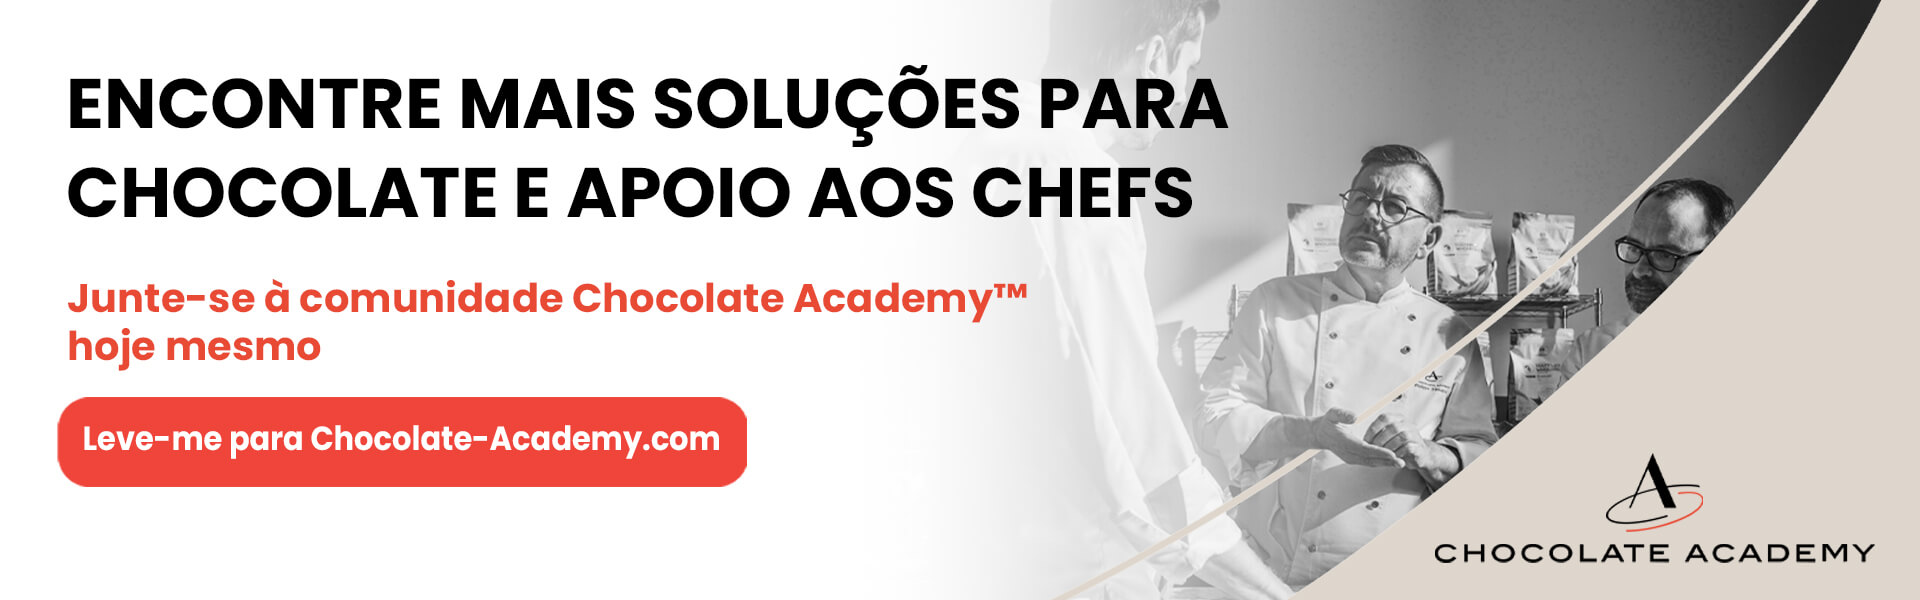 Find more chocolate solutions and chef support / Join the Chocolate Academy™ community today